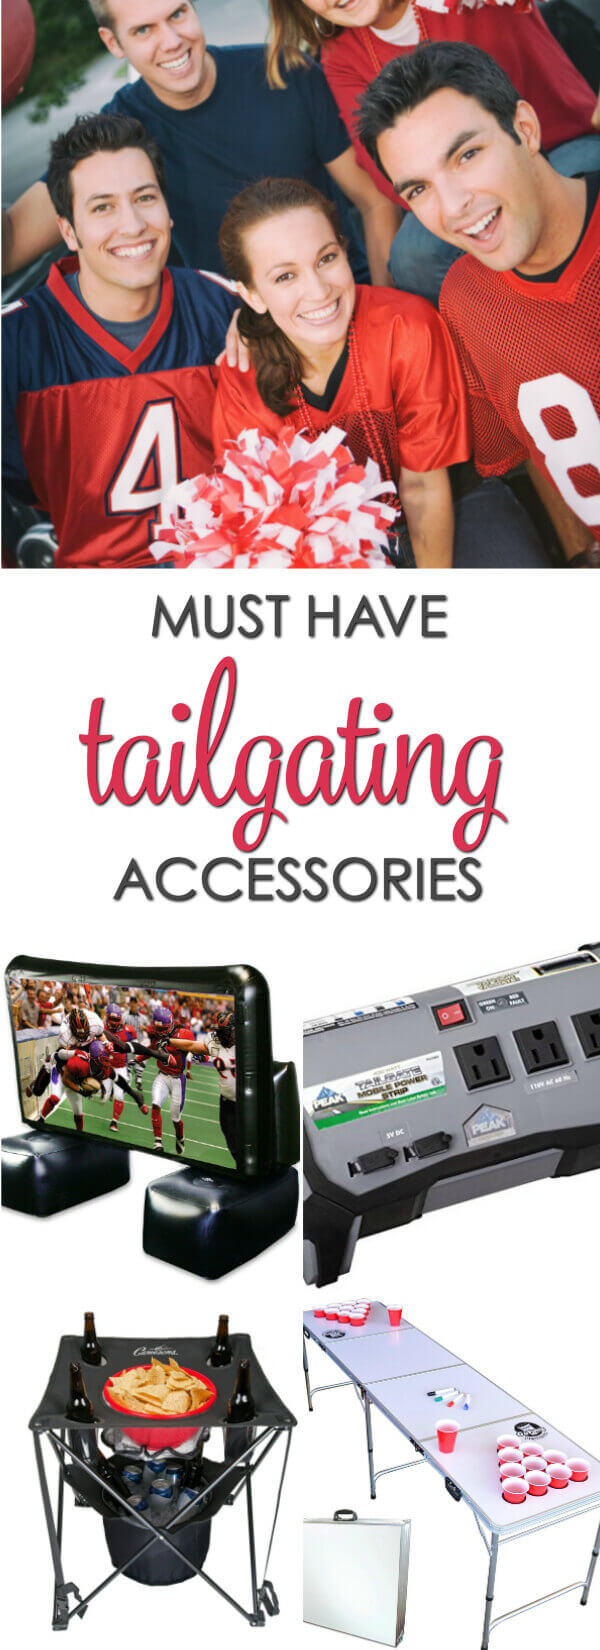 Must have tailgate party ideas to host an epic tailgating party!